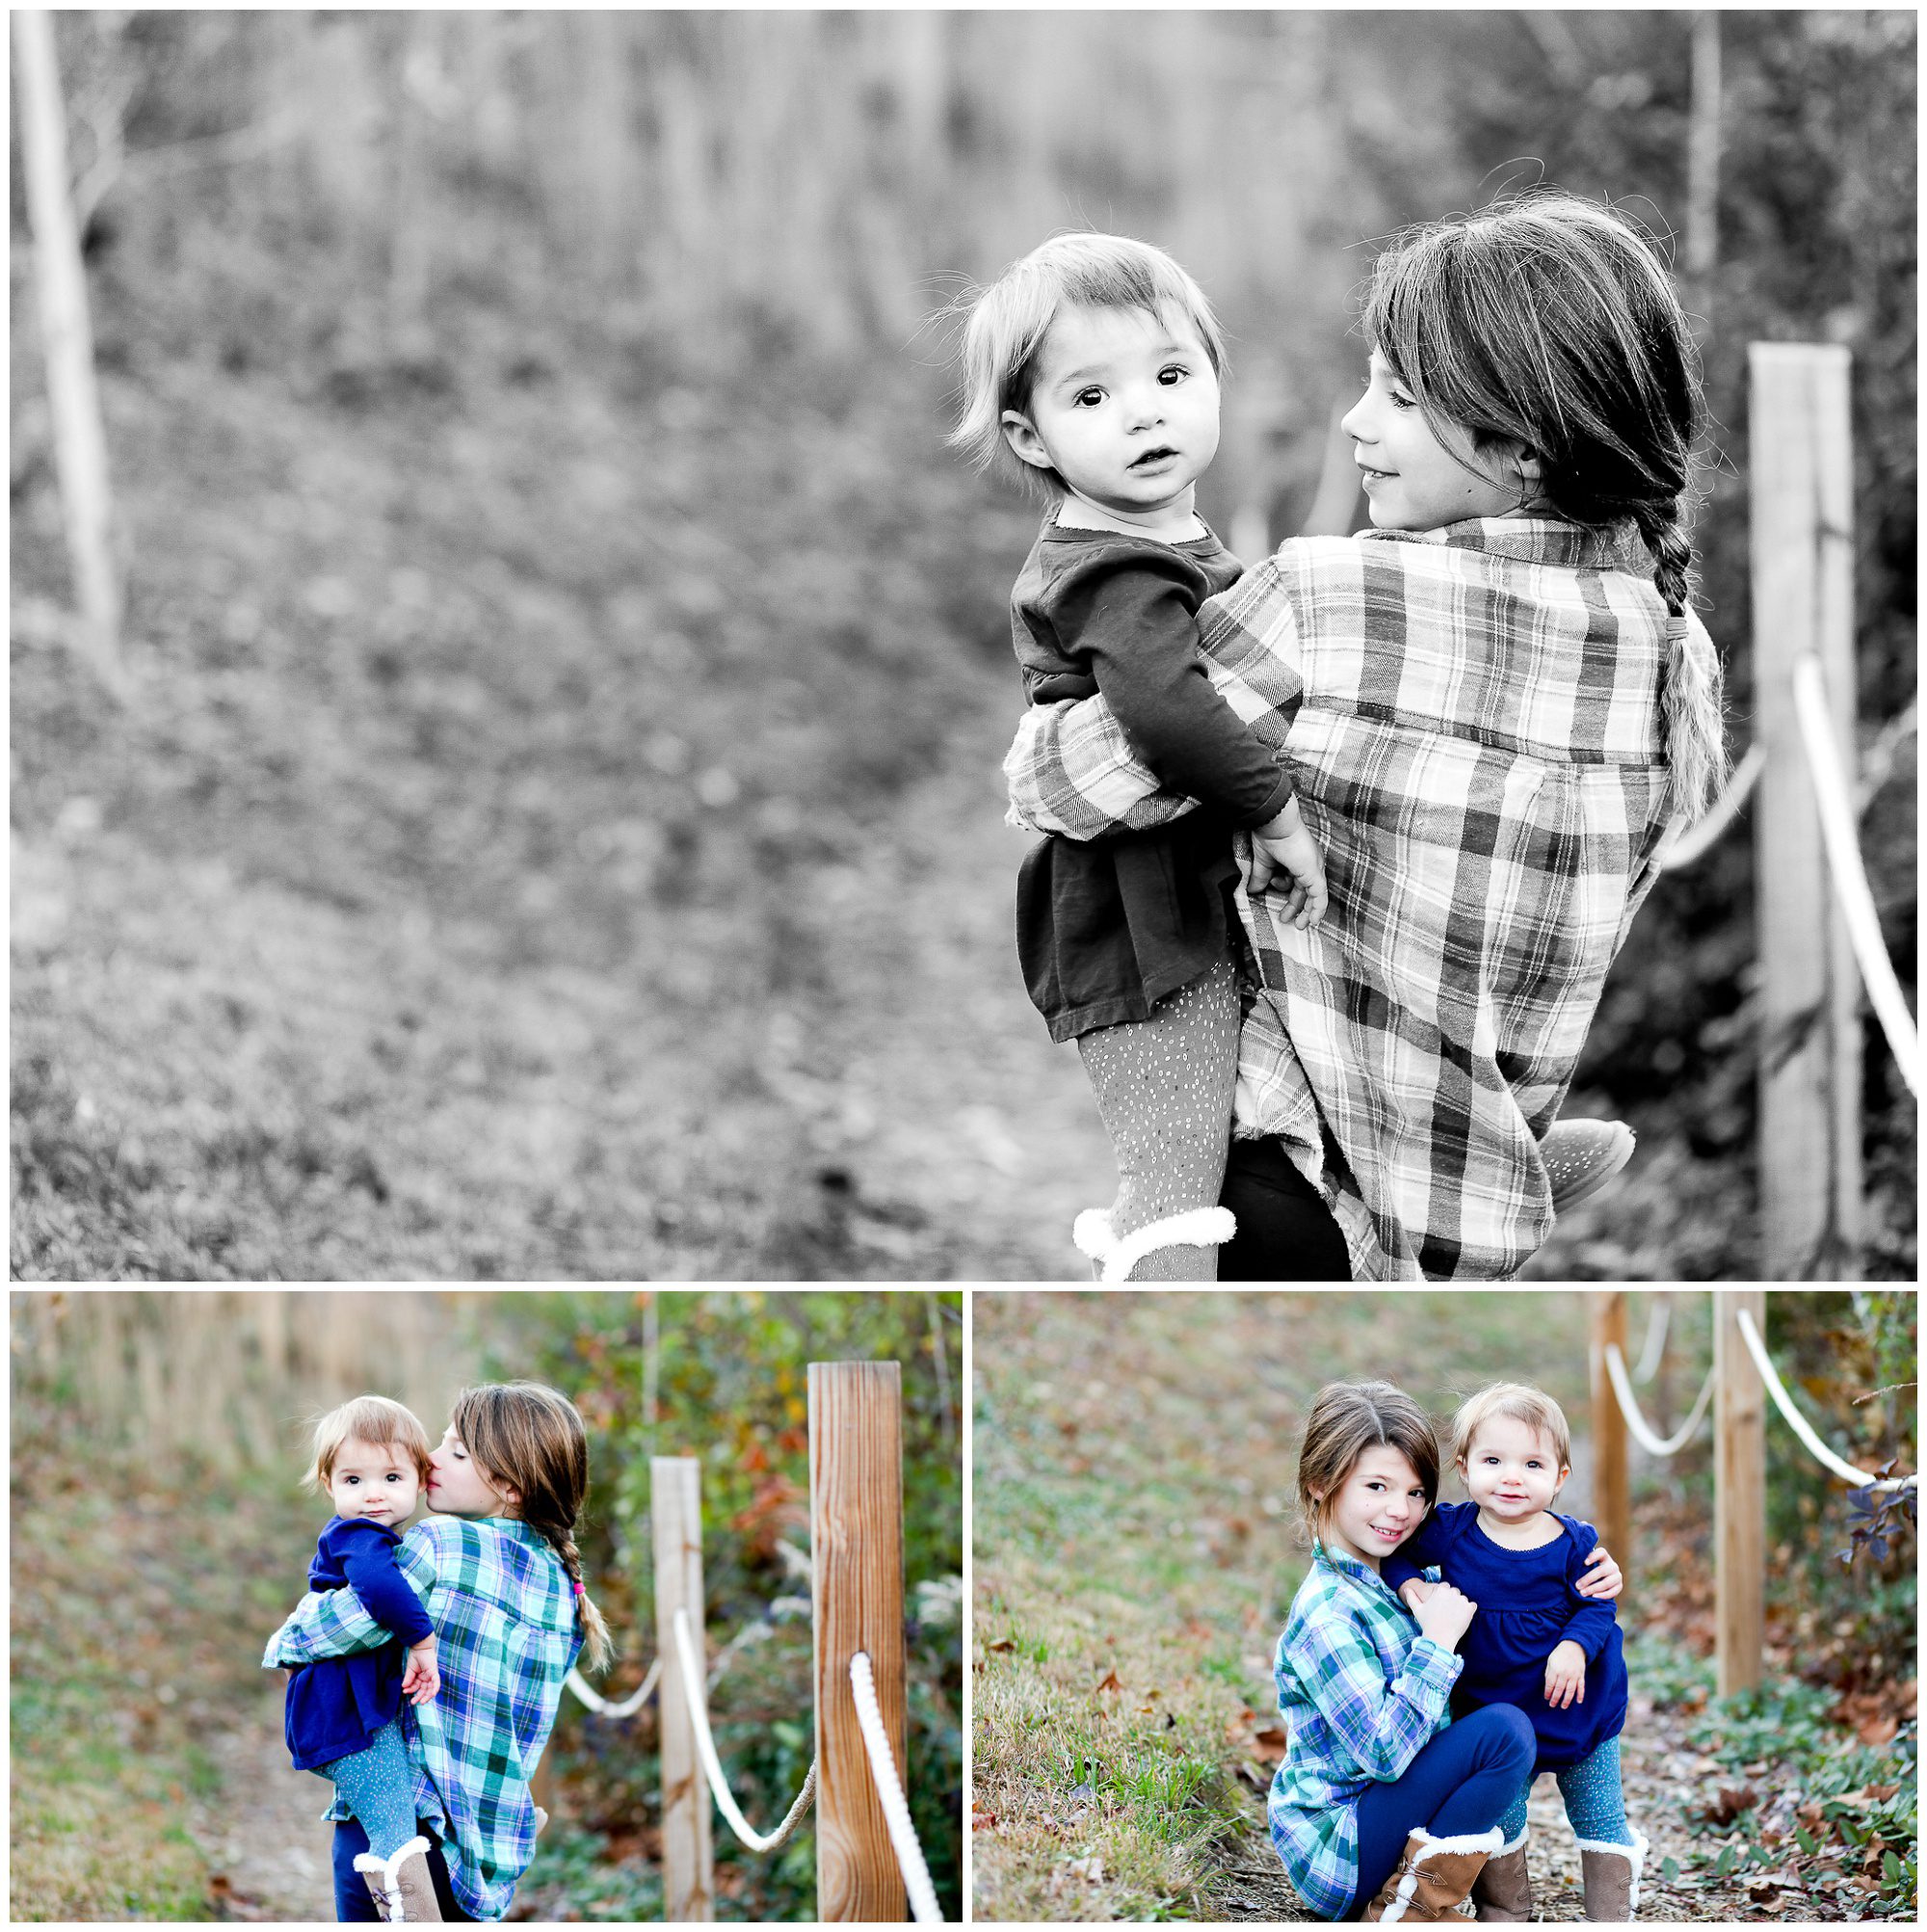 Charlottesville sister portraits albemarle countu central virginia autumn fall sibling love bond hollymead photographer pictures